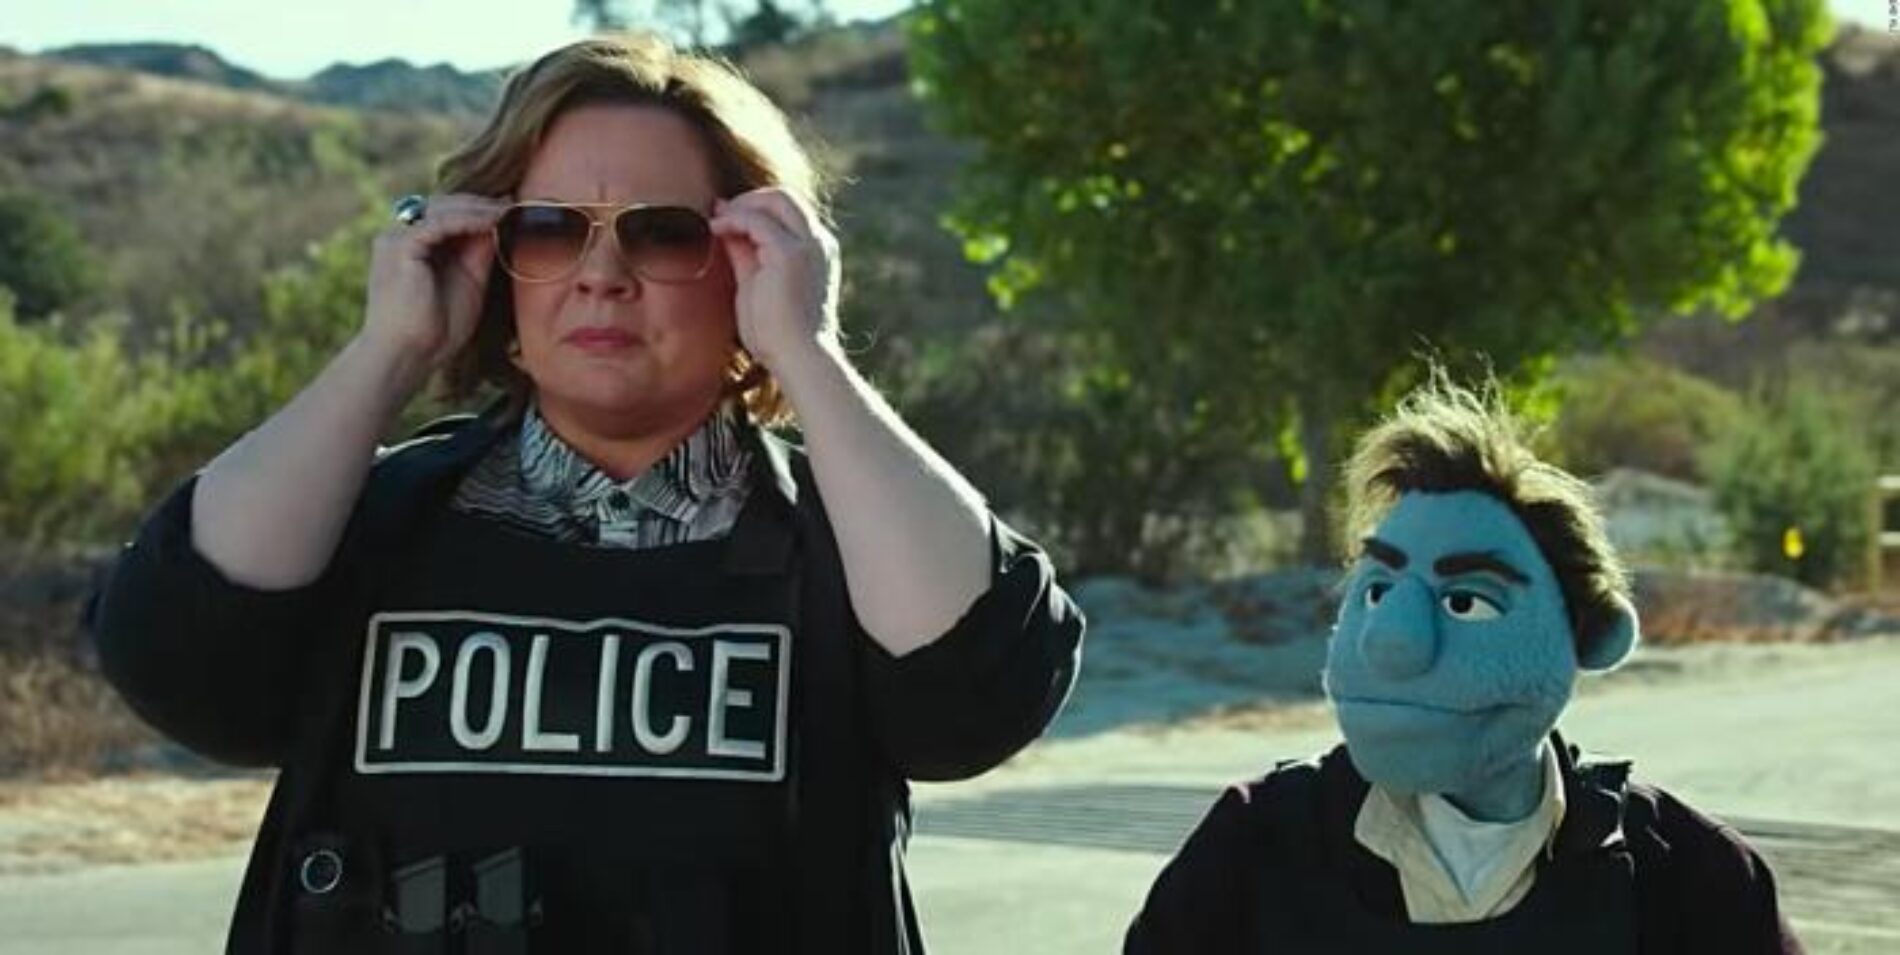 Review: “Happytime Murders” Is Puppet Porn from the Son of Muppets Creator Jim Henson